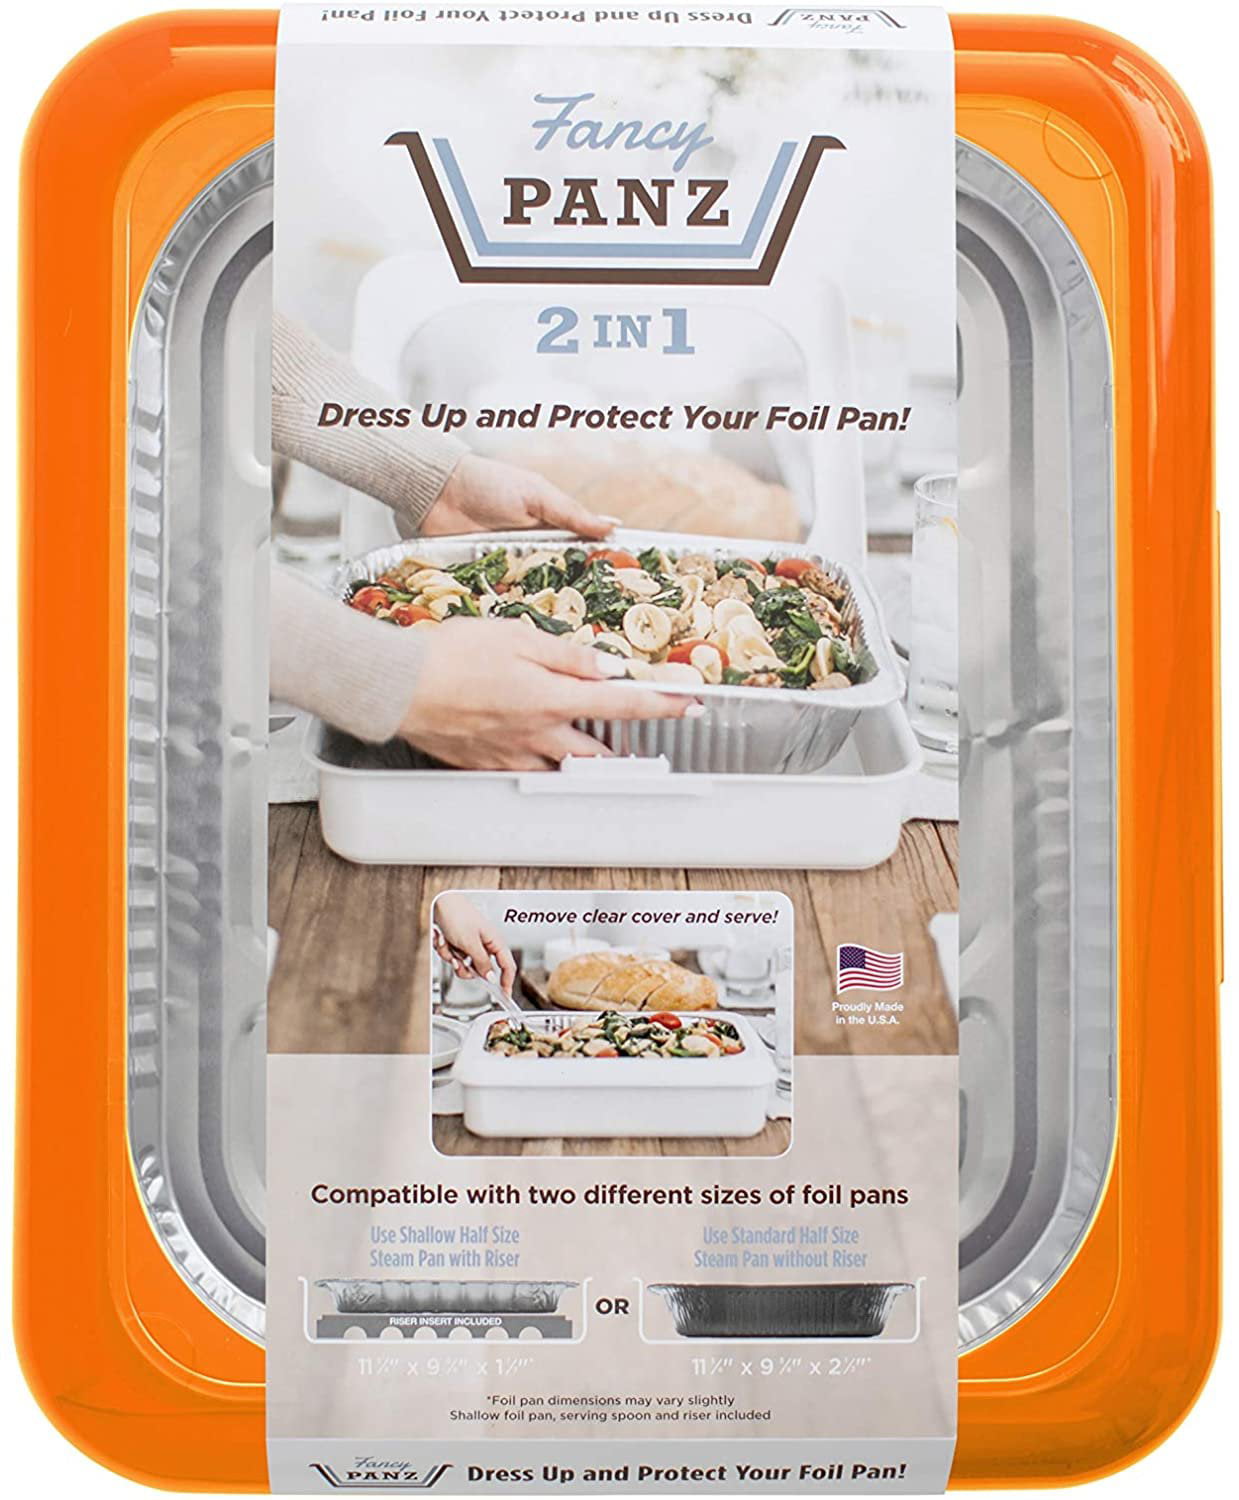 Fancy Panz Foil Pan Travel Cover, Storage and Serving - Lehman's